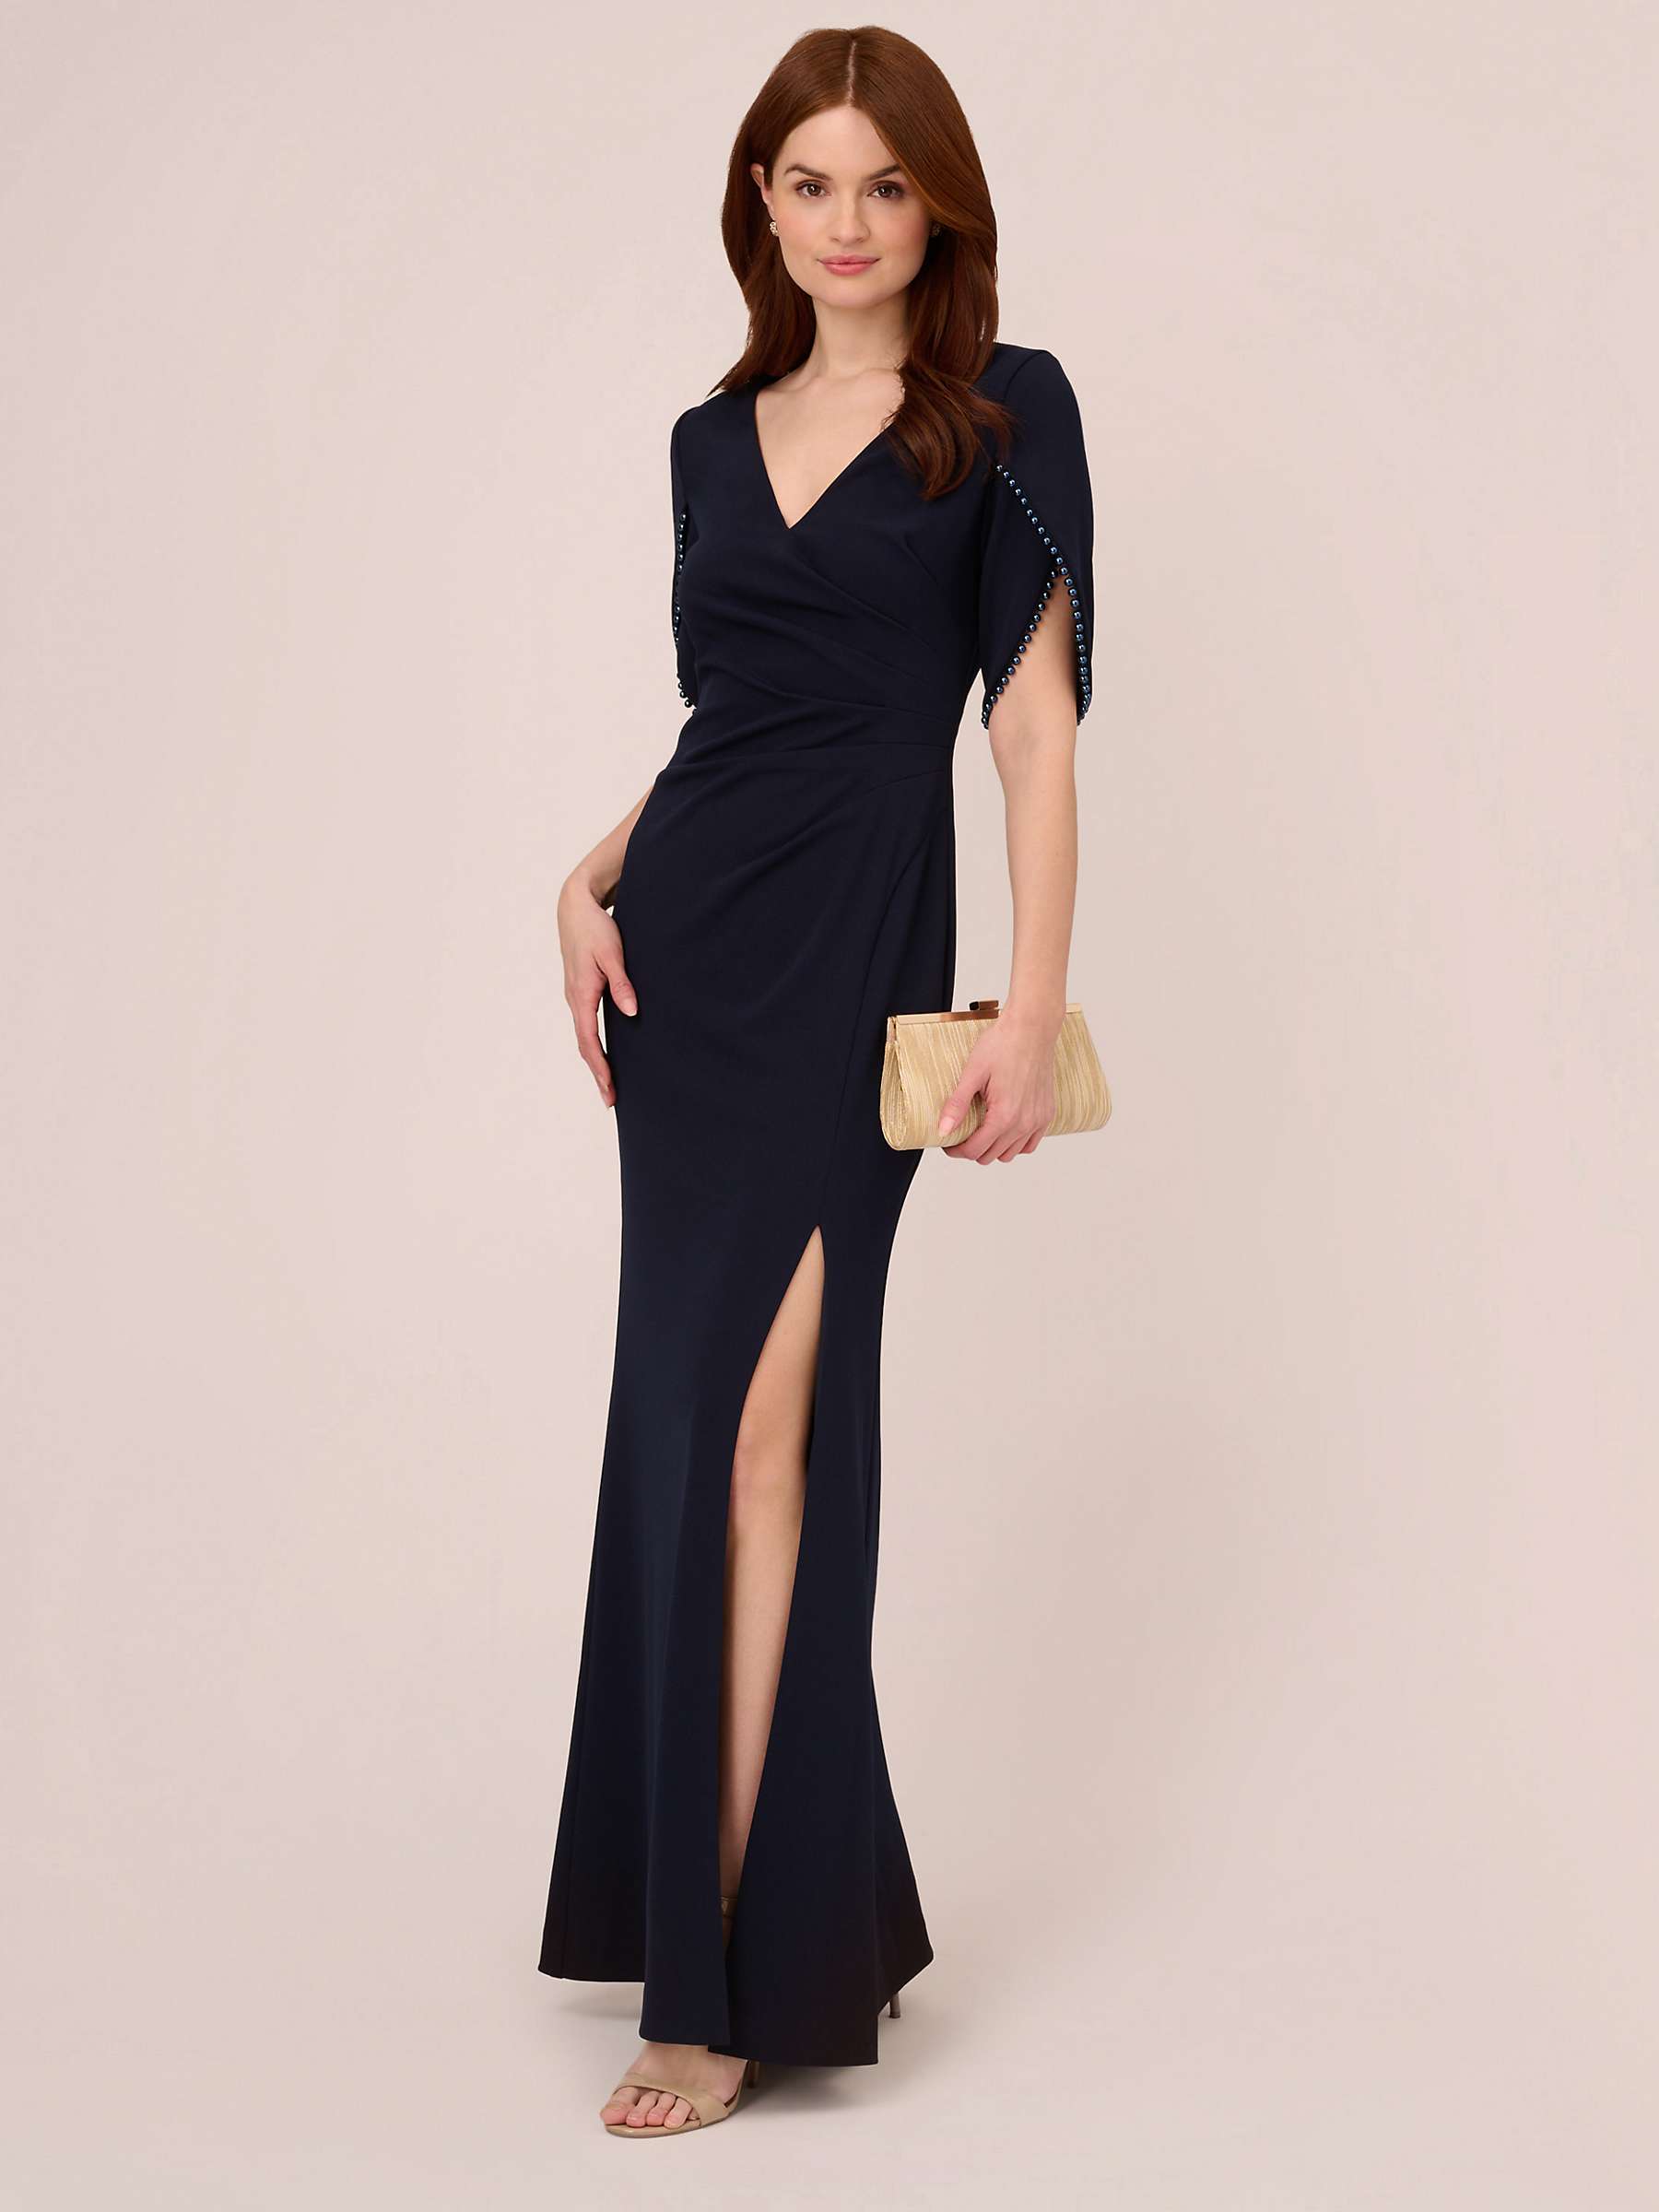 Buy Adrianna Papell Pearl Trim Knit Maxi Dress, Midnight Online at johnlewis.com